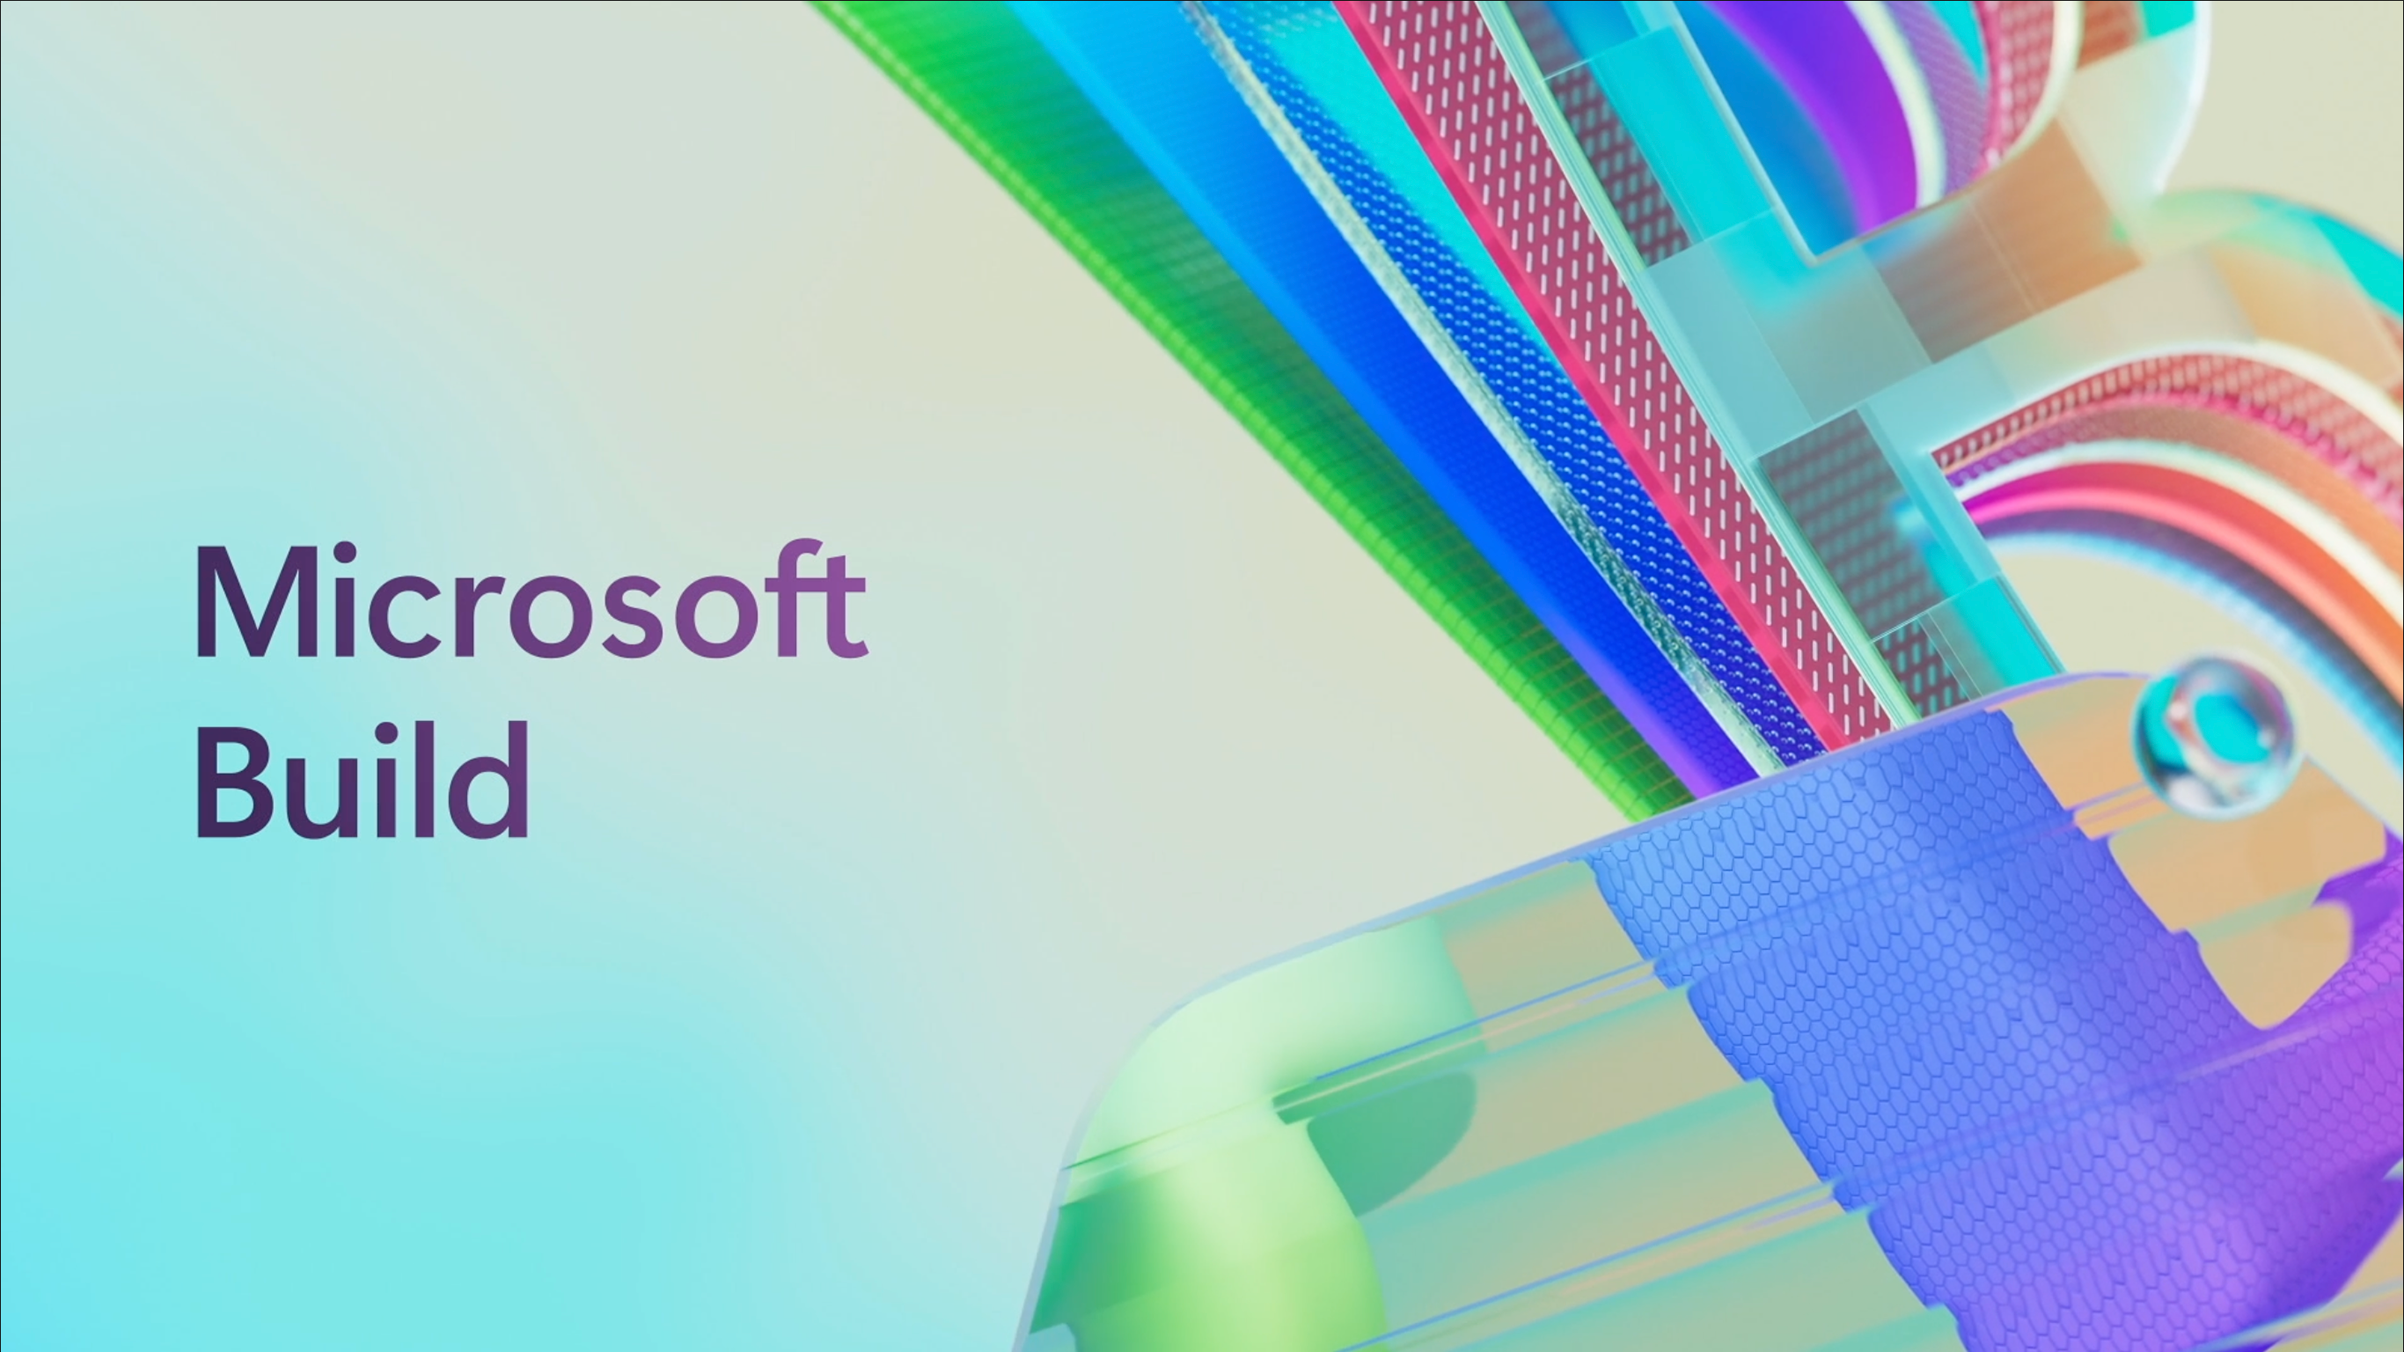 Microsoft Build banner image with color abastract art in the background